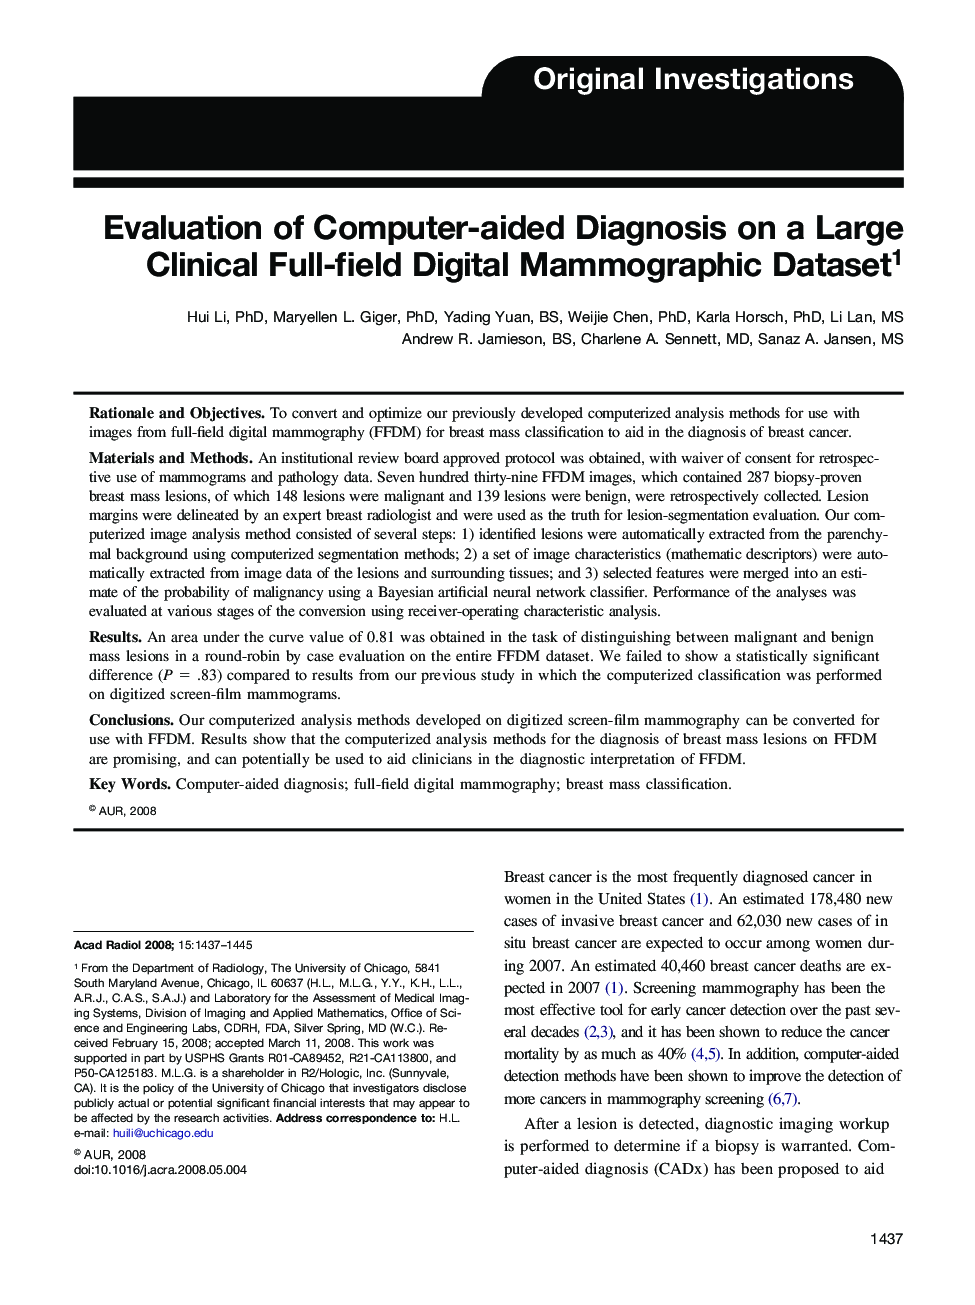 Evaluation of Computer-aided Diagnosis on a Large Clinical Full-field Digital Mammographic Dataset